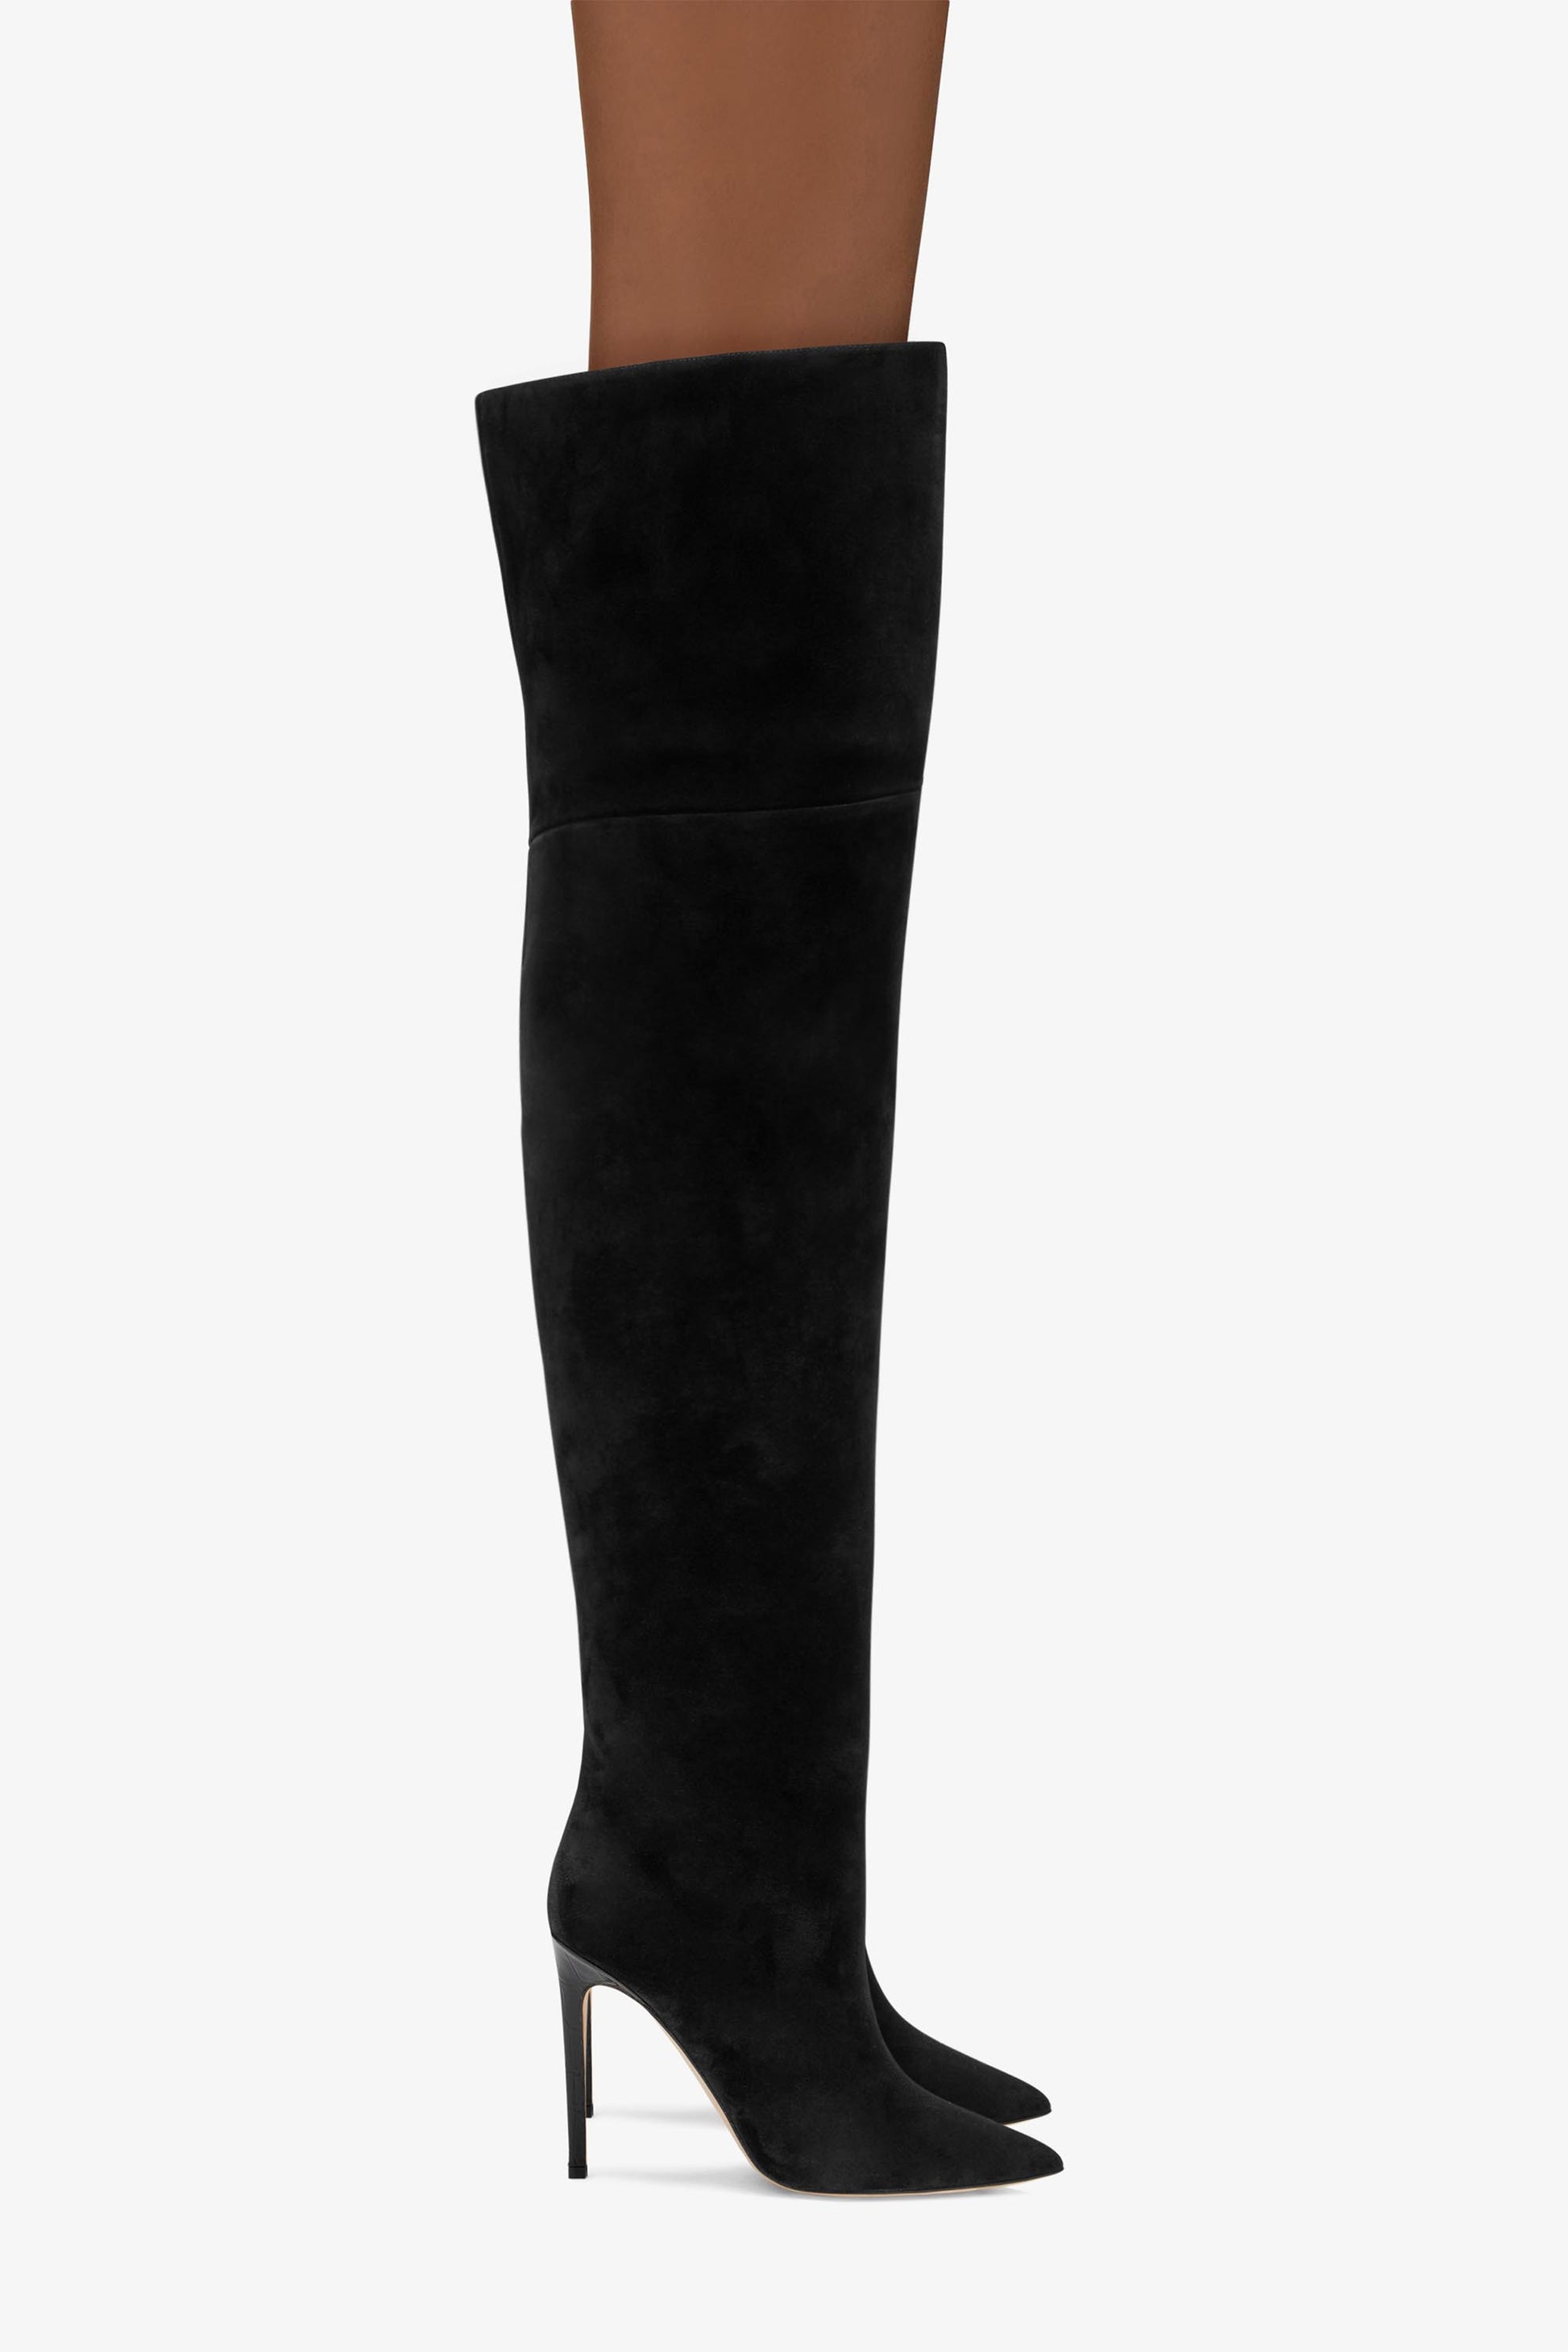 Black calf suede over the knee boots - Product worn